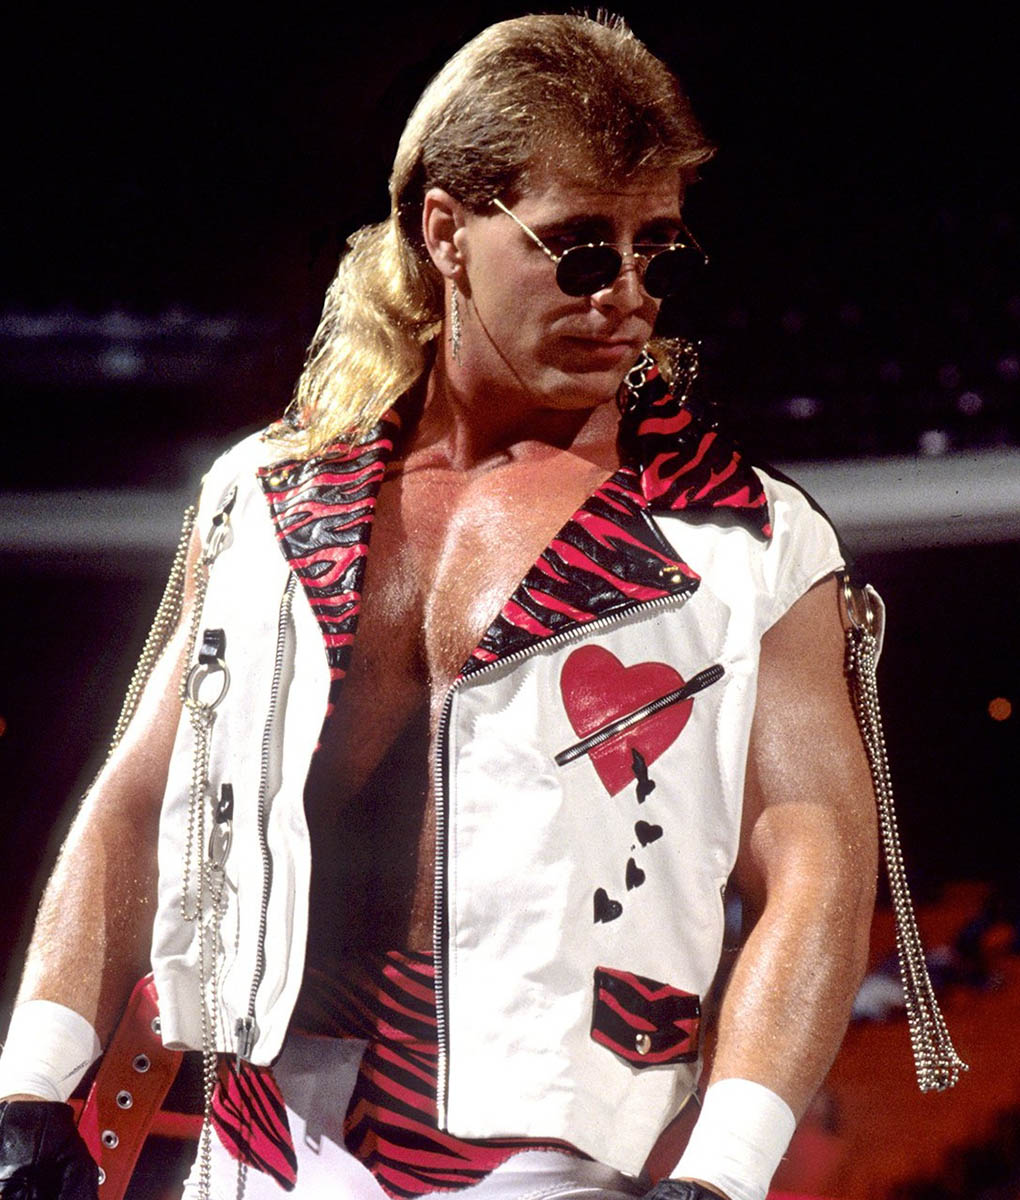 WWE Shawn Michaels White Leather Vest